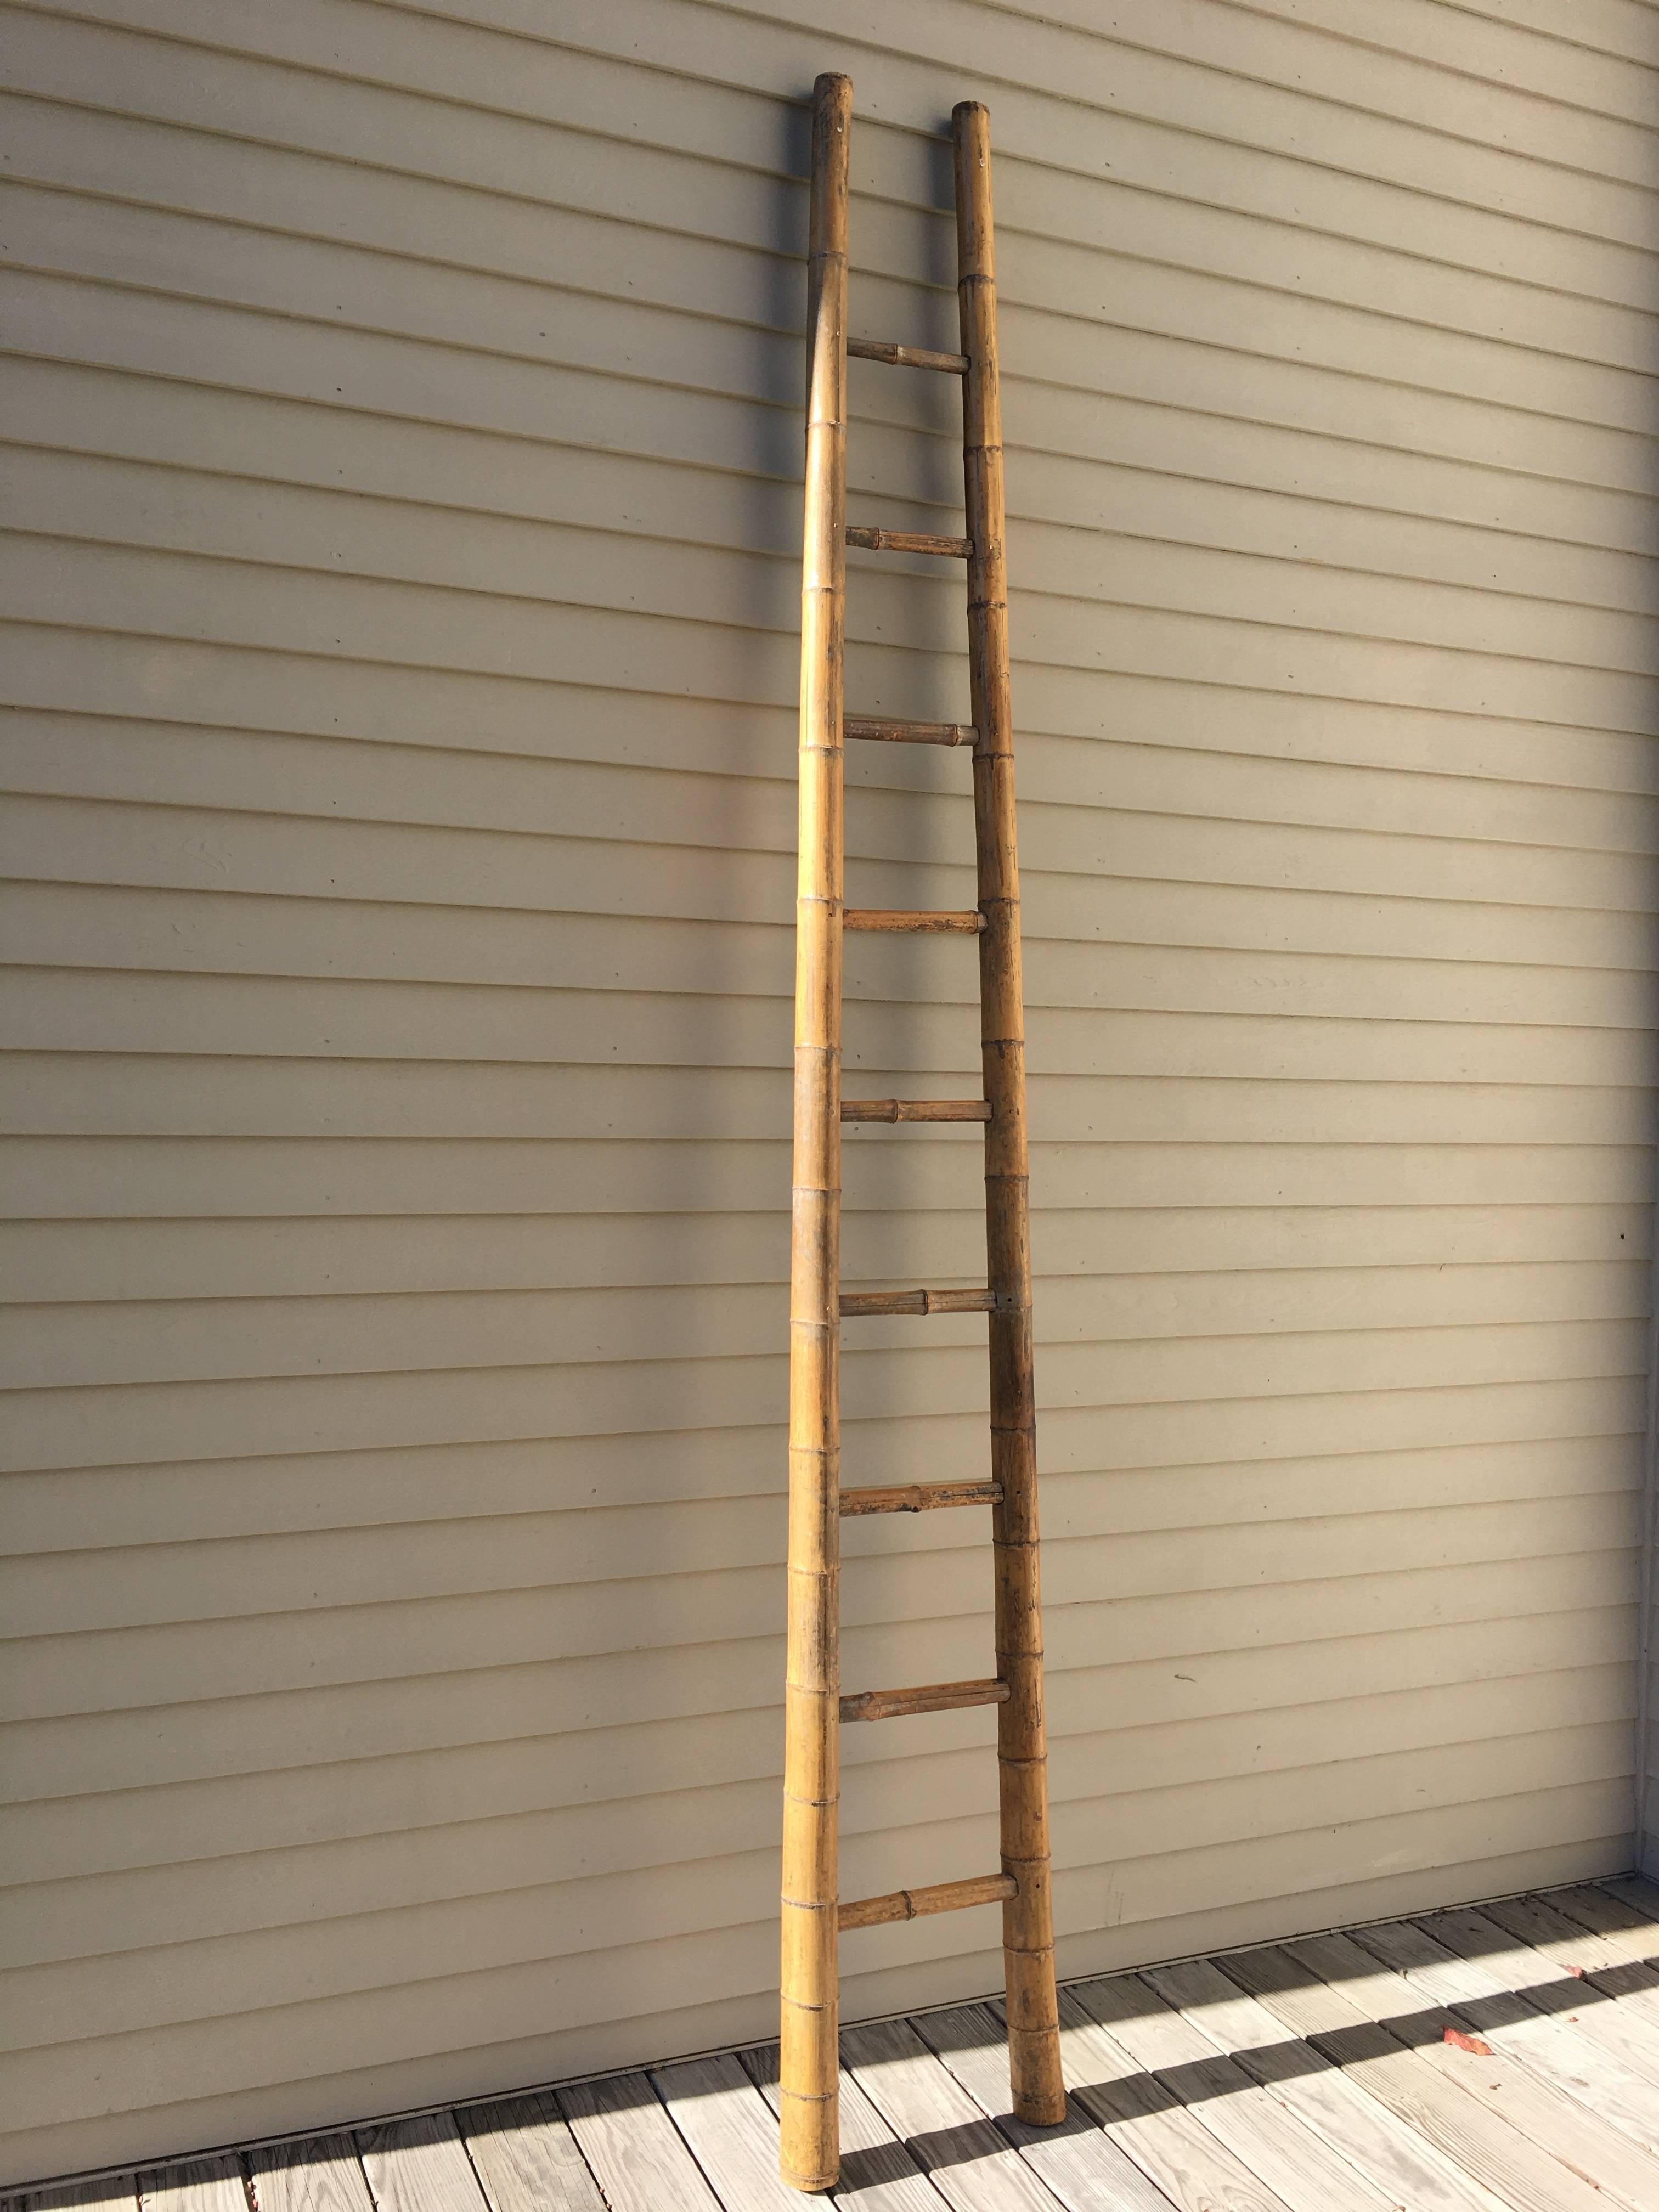 What a beauty! This very tall handmade bamboo ladder is in the form of an orchard ladder and may have been used for that purpose, but could also be a display piece. Use it as an accent piece in a bathroom to hold towels and if your ceilings aren't